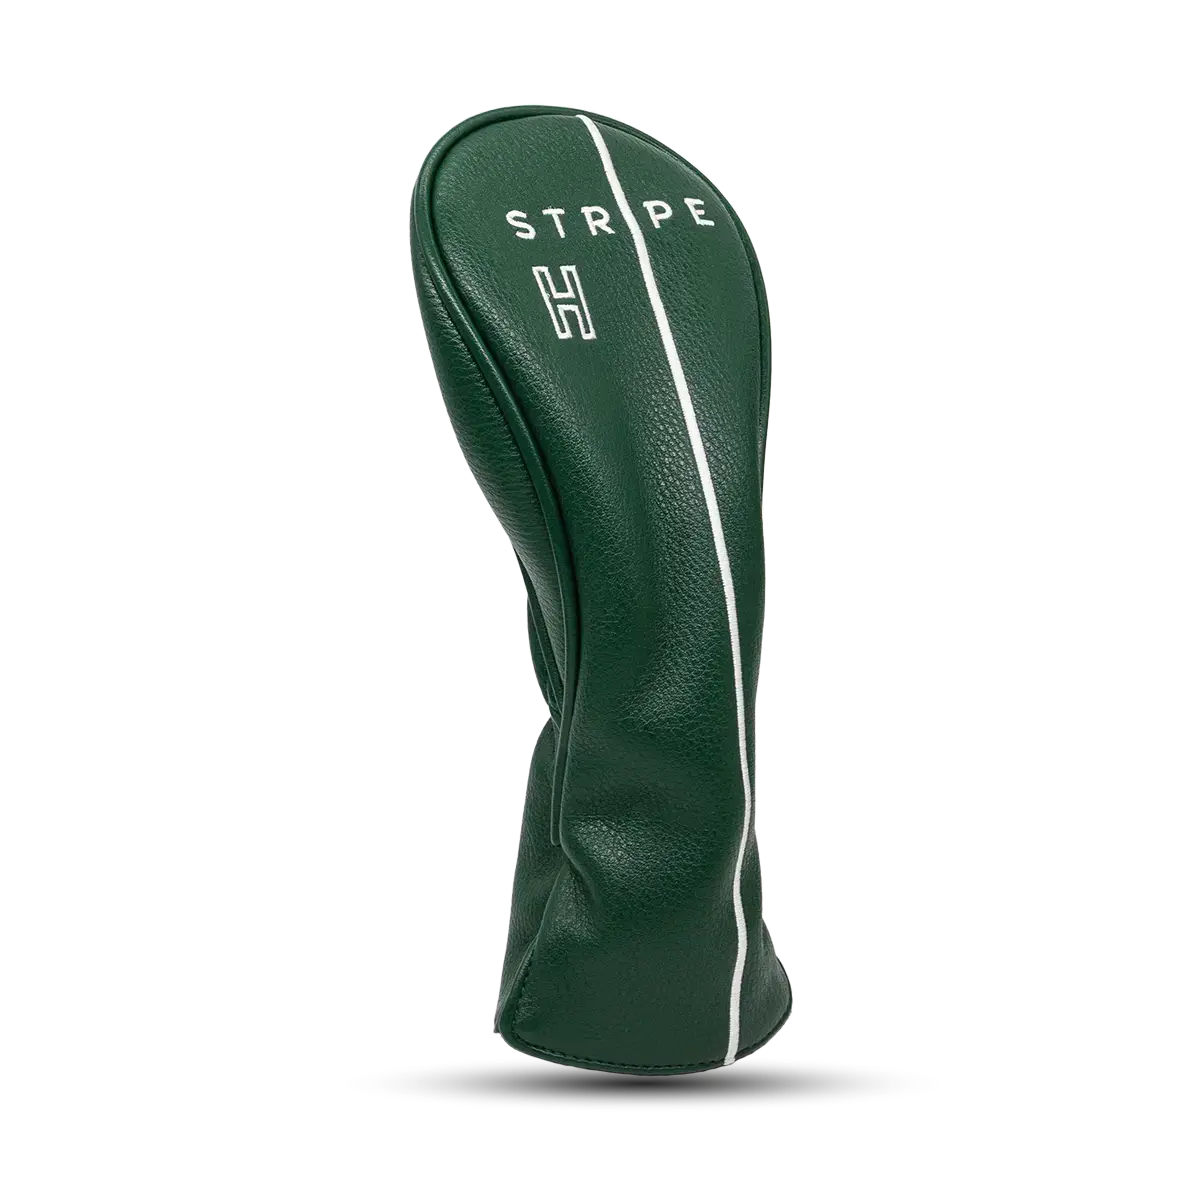 Hybrid headcover in green leather with a white embroidered logo. With protective fleece lining inside, your hybrid is kept safe and sound in style.